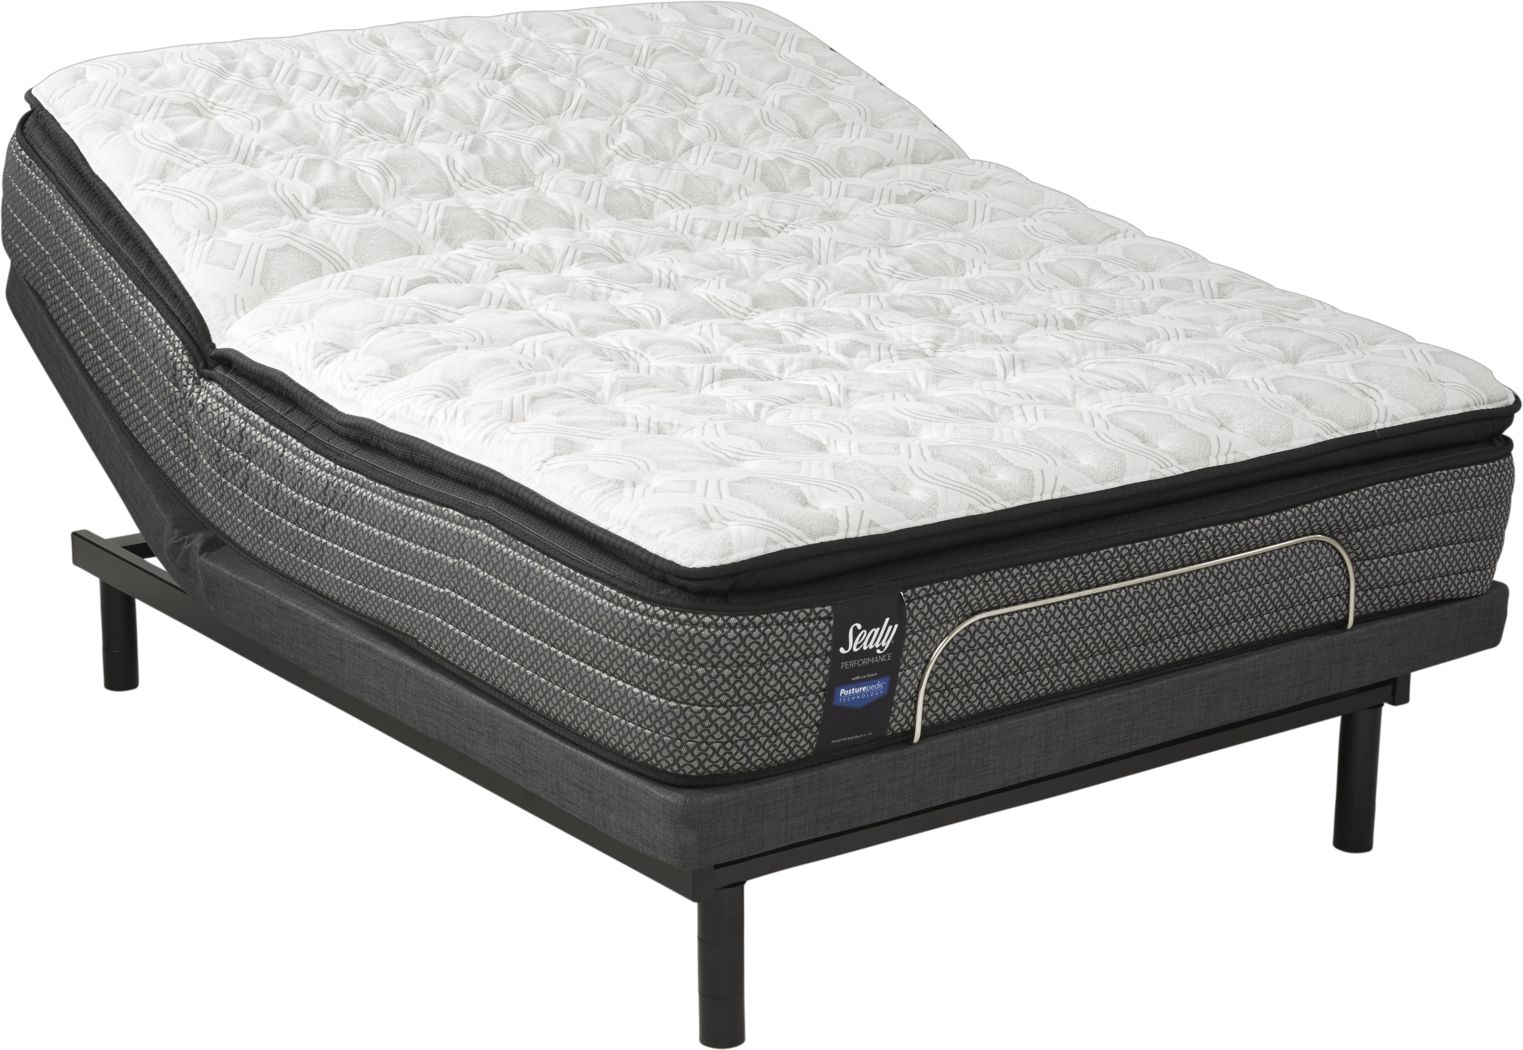 sealy crystal mattress review